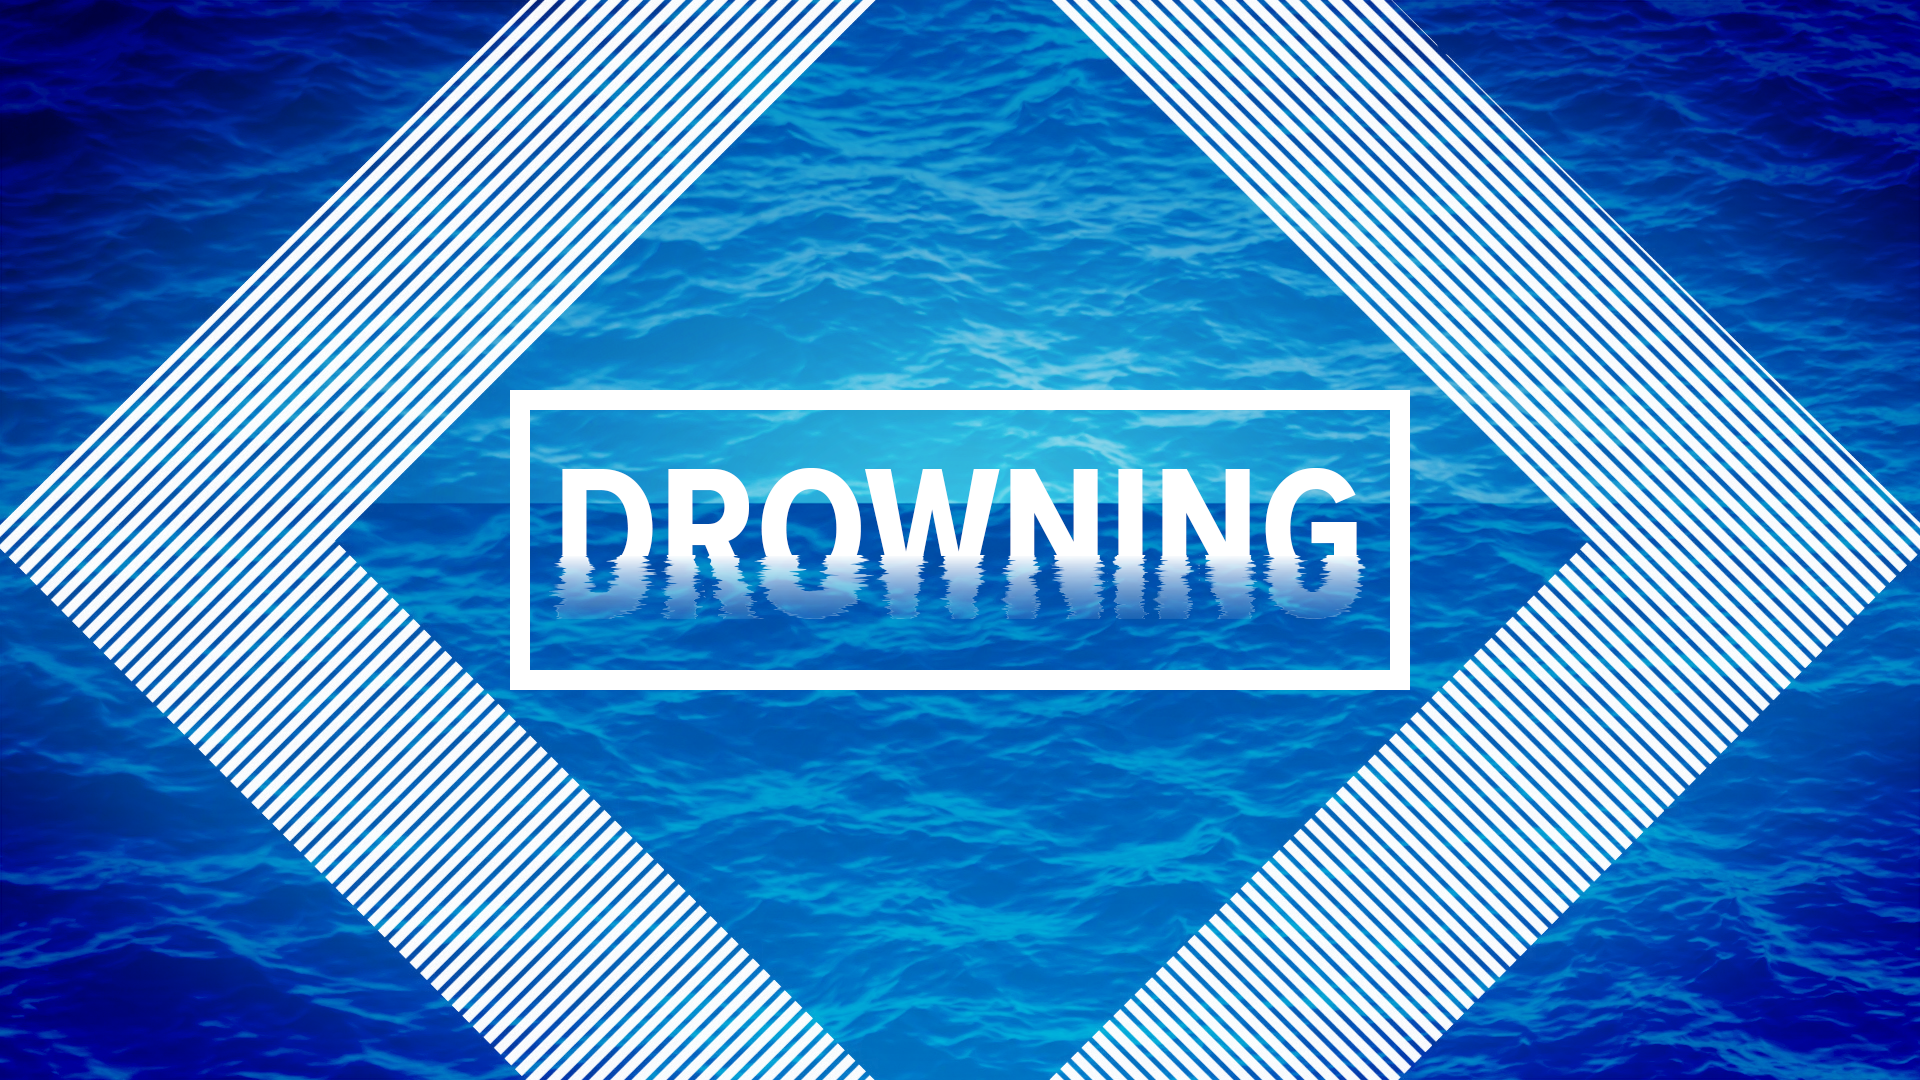 31-year-old Eric Johnson, of Moody, was identified as the drowning victim by Temple police.